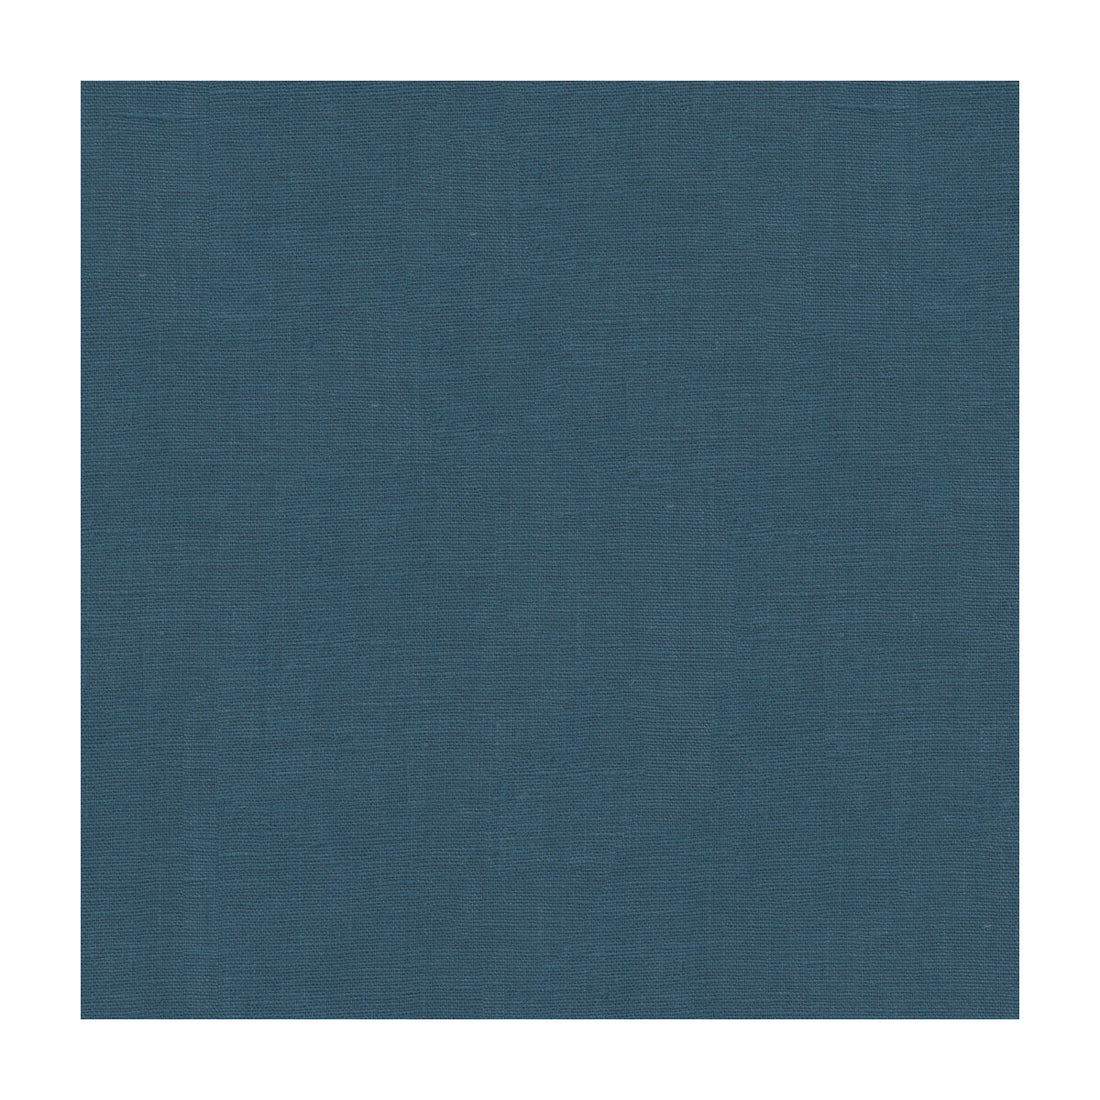 Dublin fabric in denim color - pattern 32344.5.0 - by Kravet Basics in the Perfect Plains collection